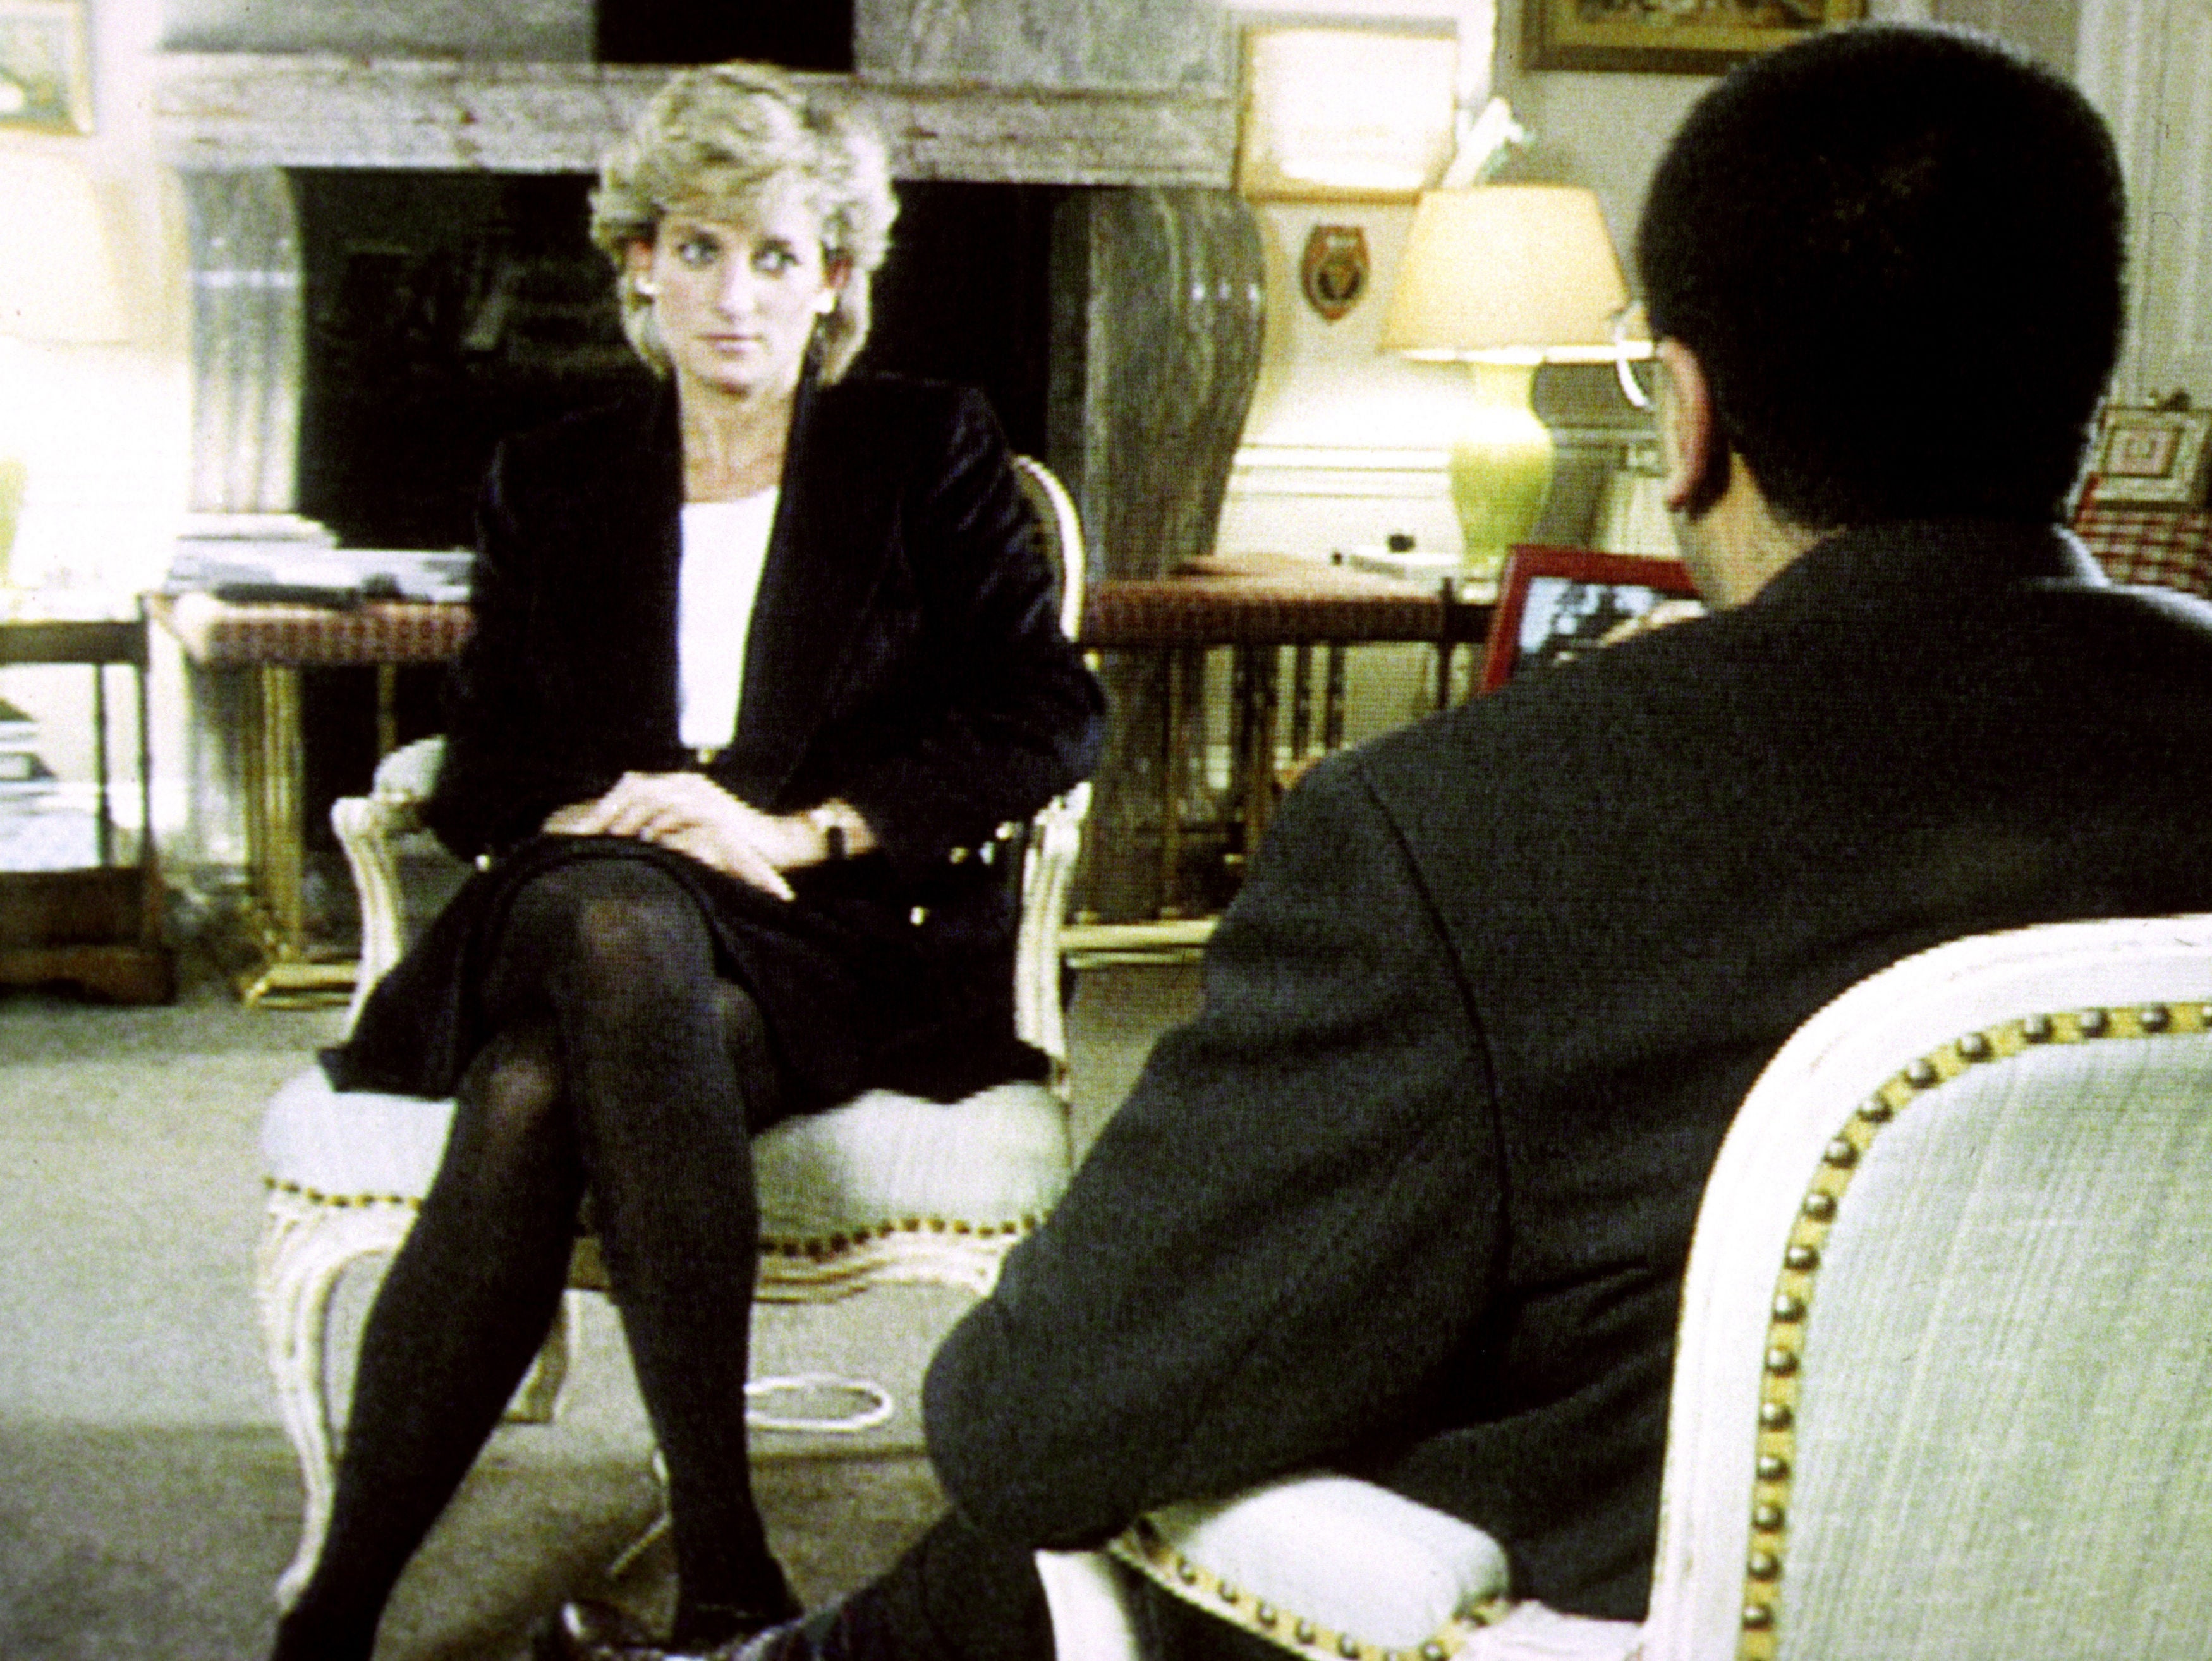 Diana, Princess of Wales, during her interview with Martin Bashir for the BBC in 1995